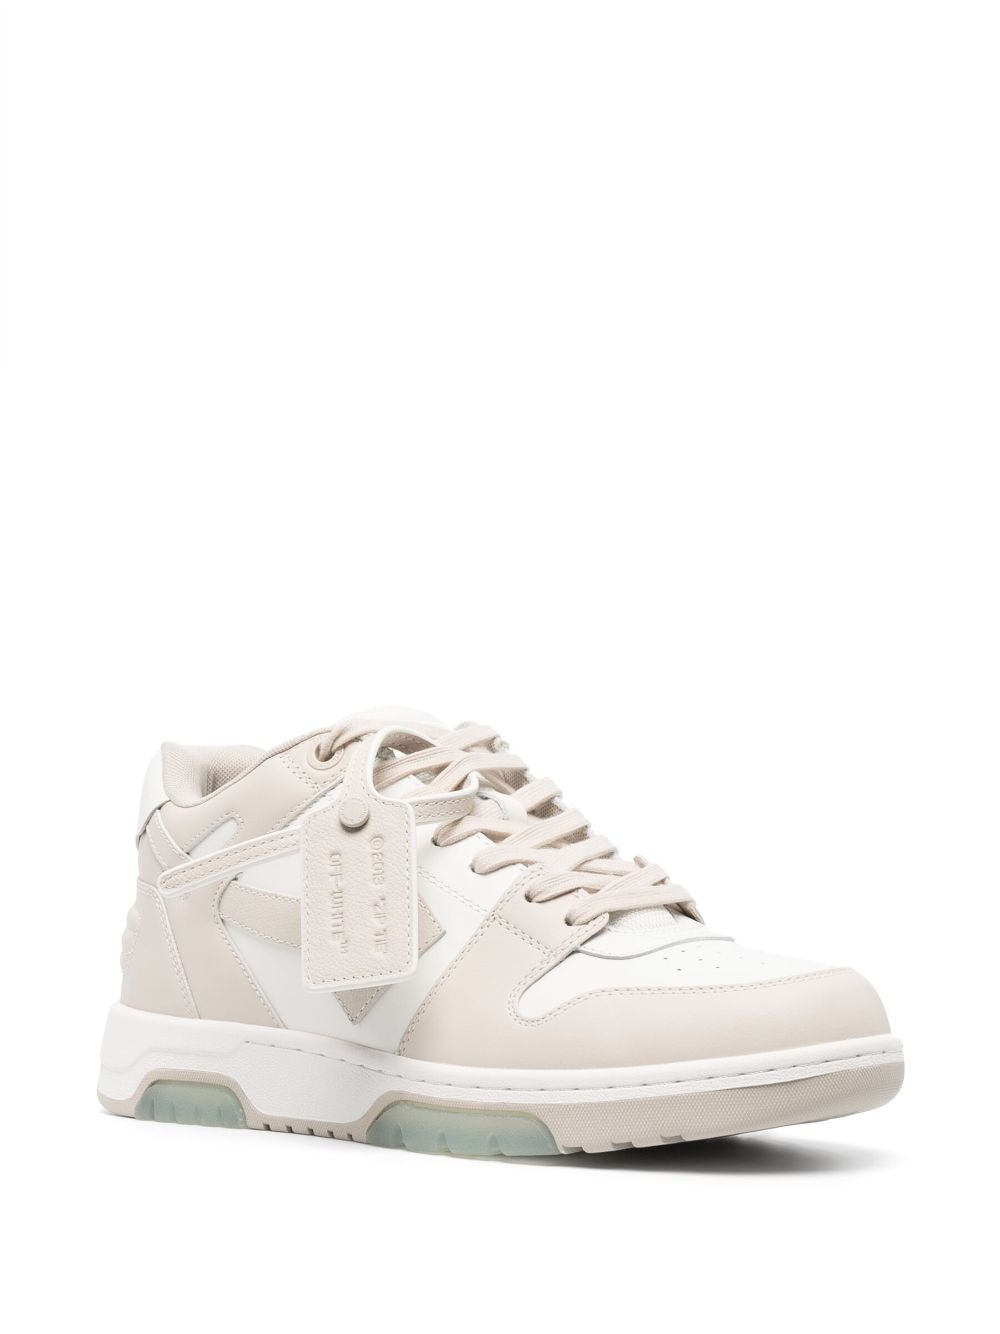 Off-White Out Of Office 'OOO' sneakers - WHITE BEIGE